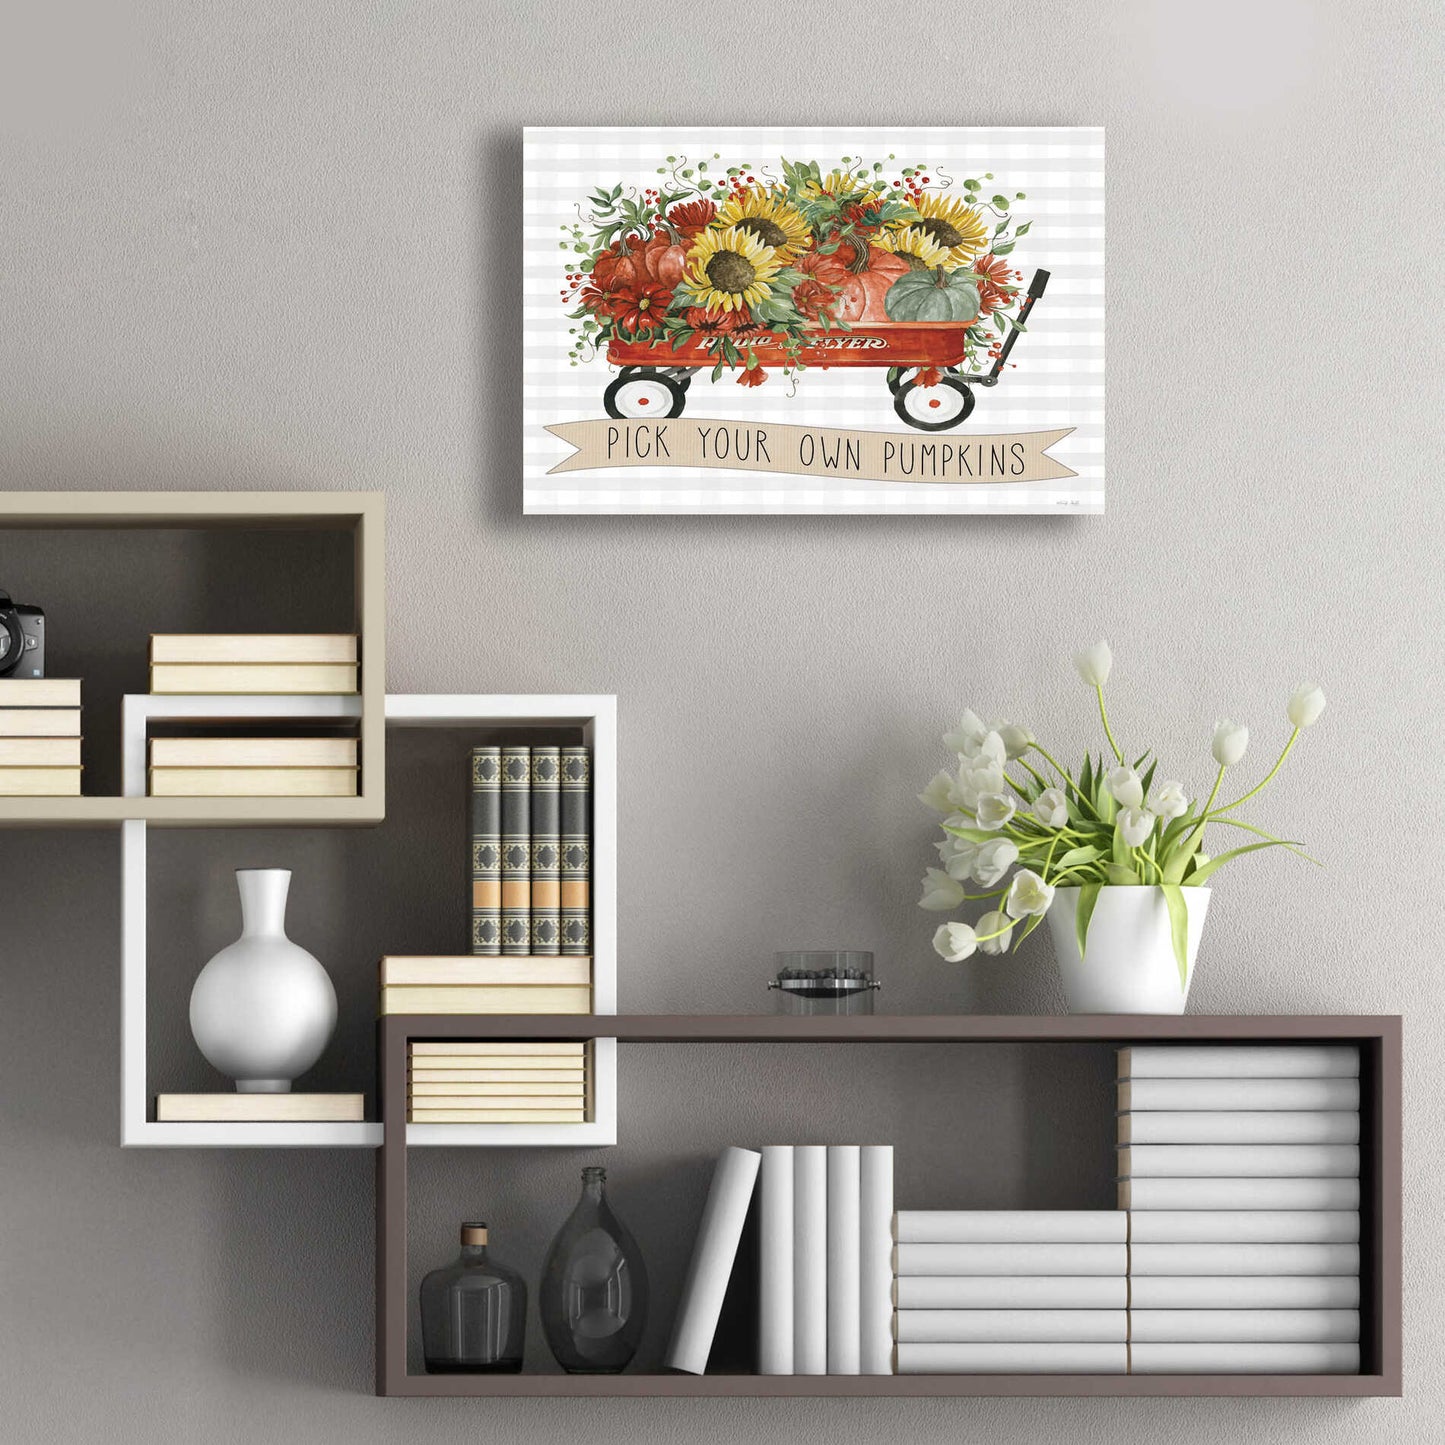 Epic Art 'Pick Your Own Pumpkins Wagon' by Cindy Jacobs, Acrylic Glass Wall Art,24x16